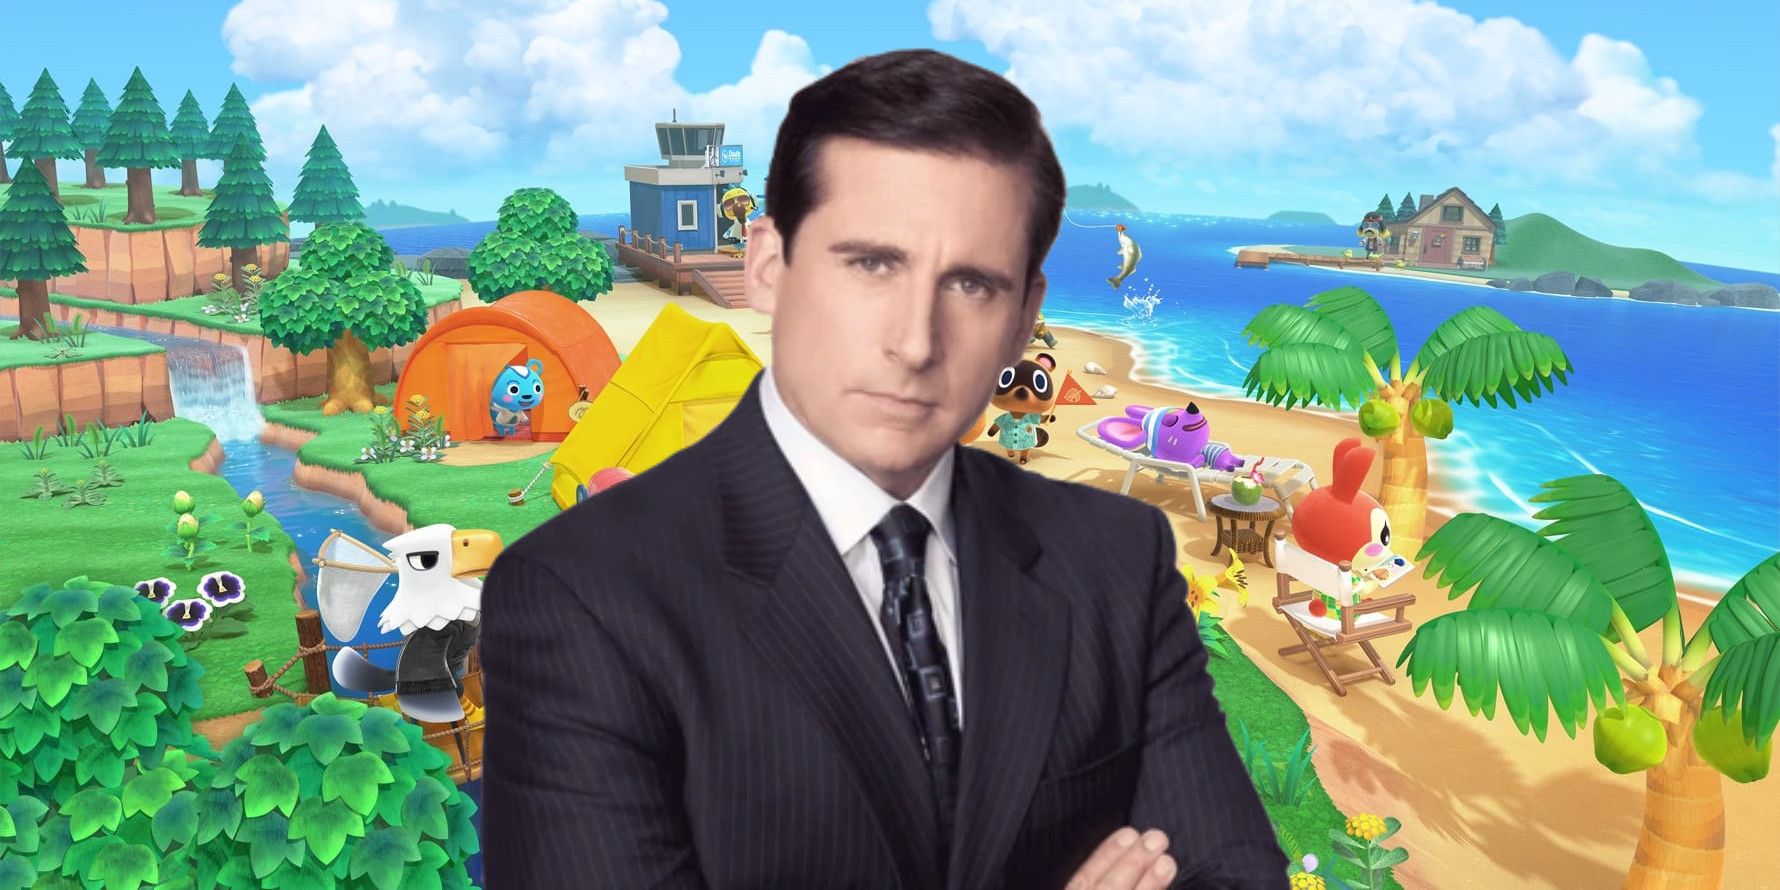 The Office's Michael Scott in front of a promotional image for Animal Crossing New Horizons